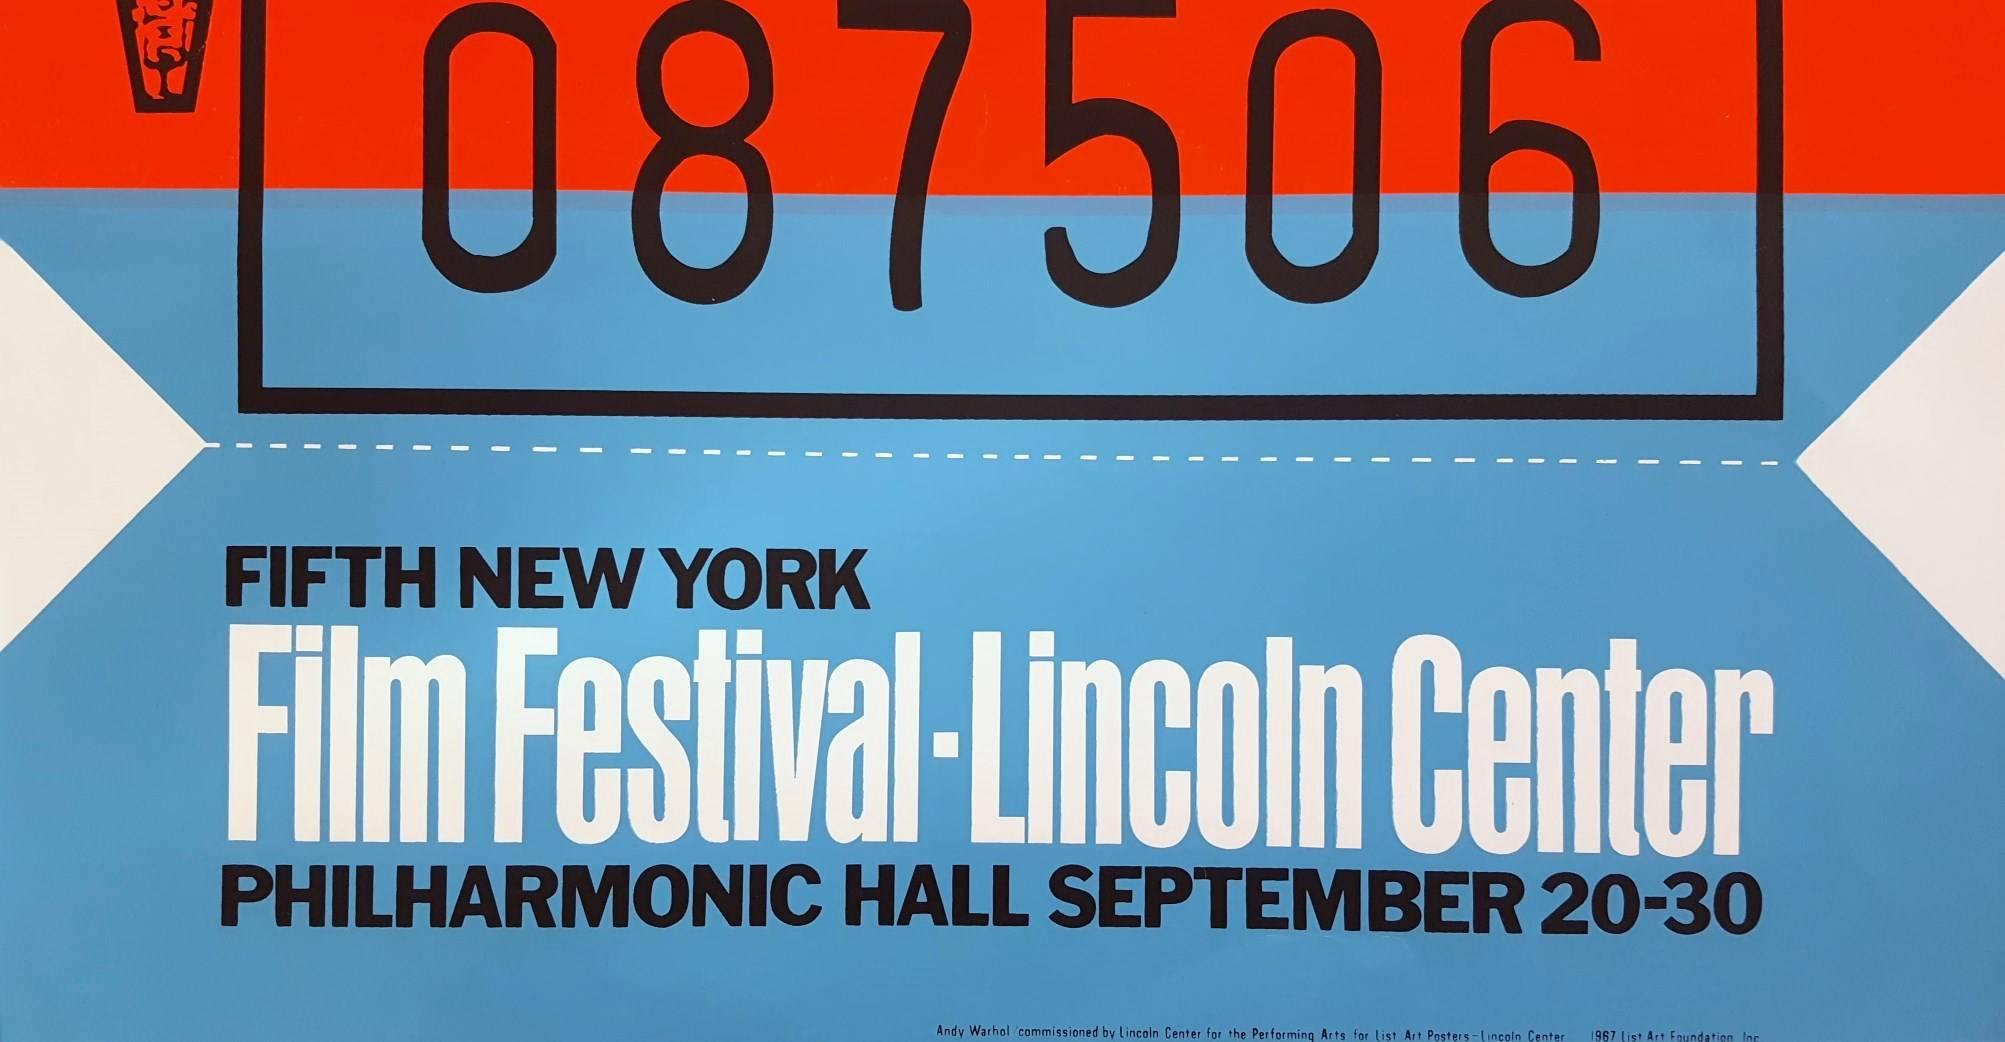 Lincoln Center Ticket (FS II.19) - Print by Andy Warhol